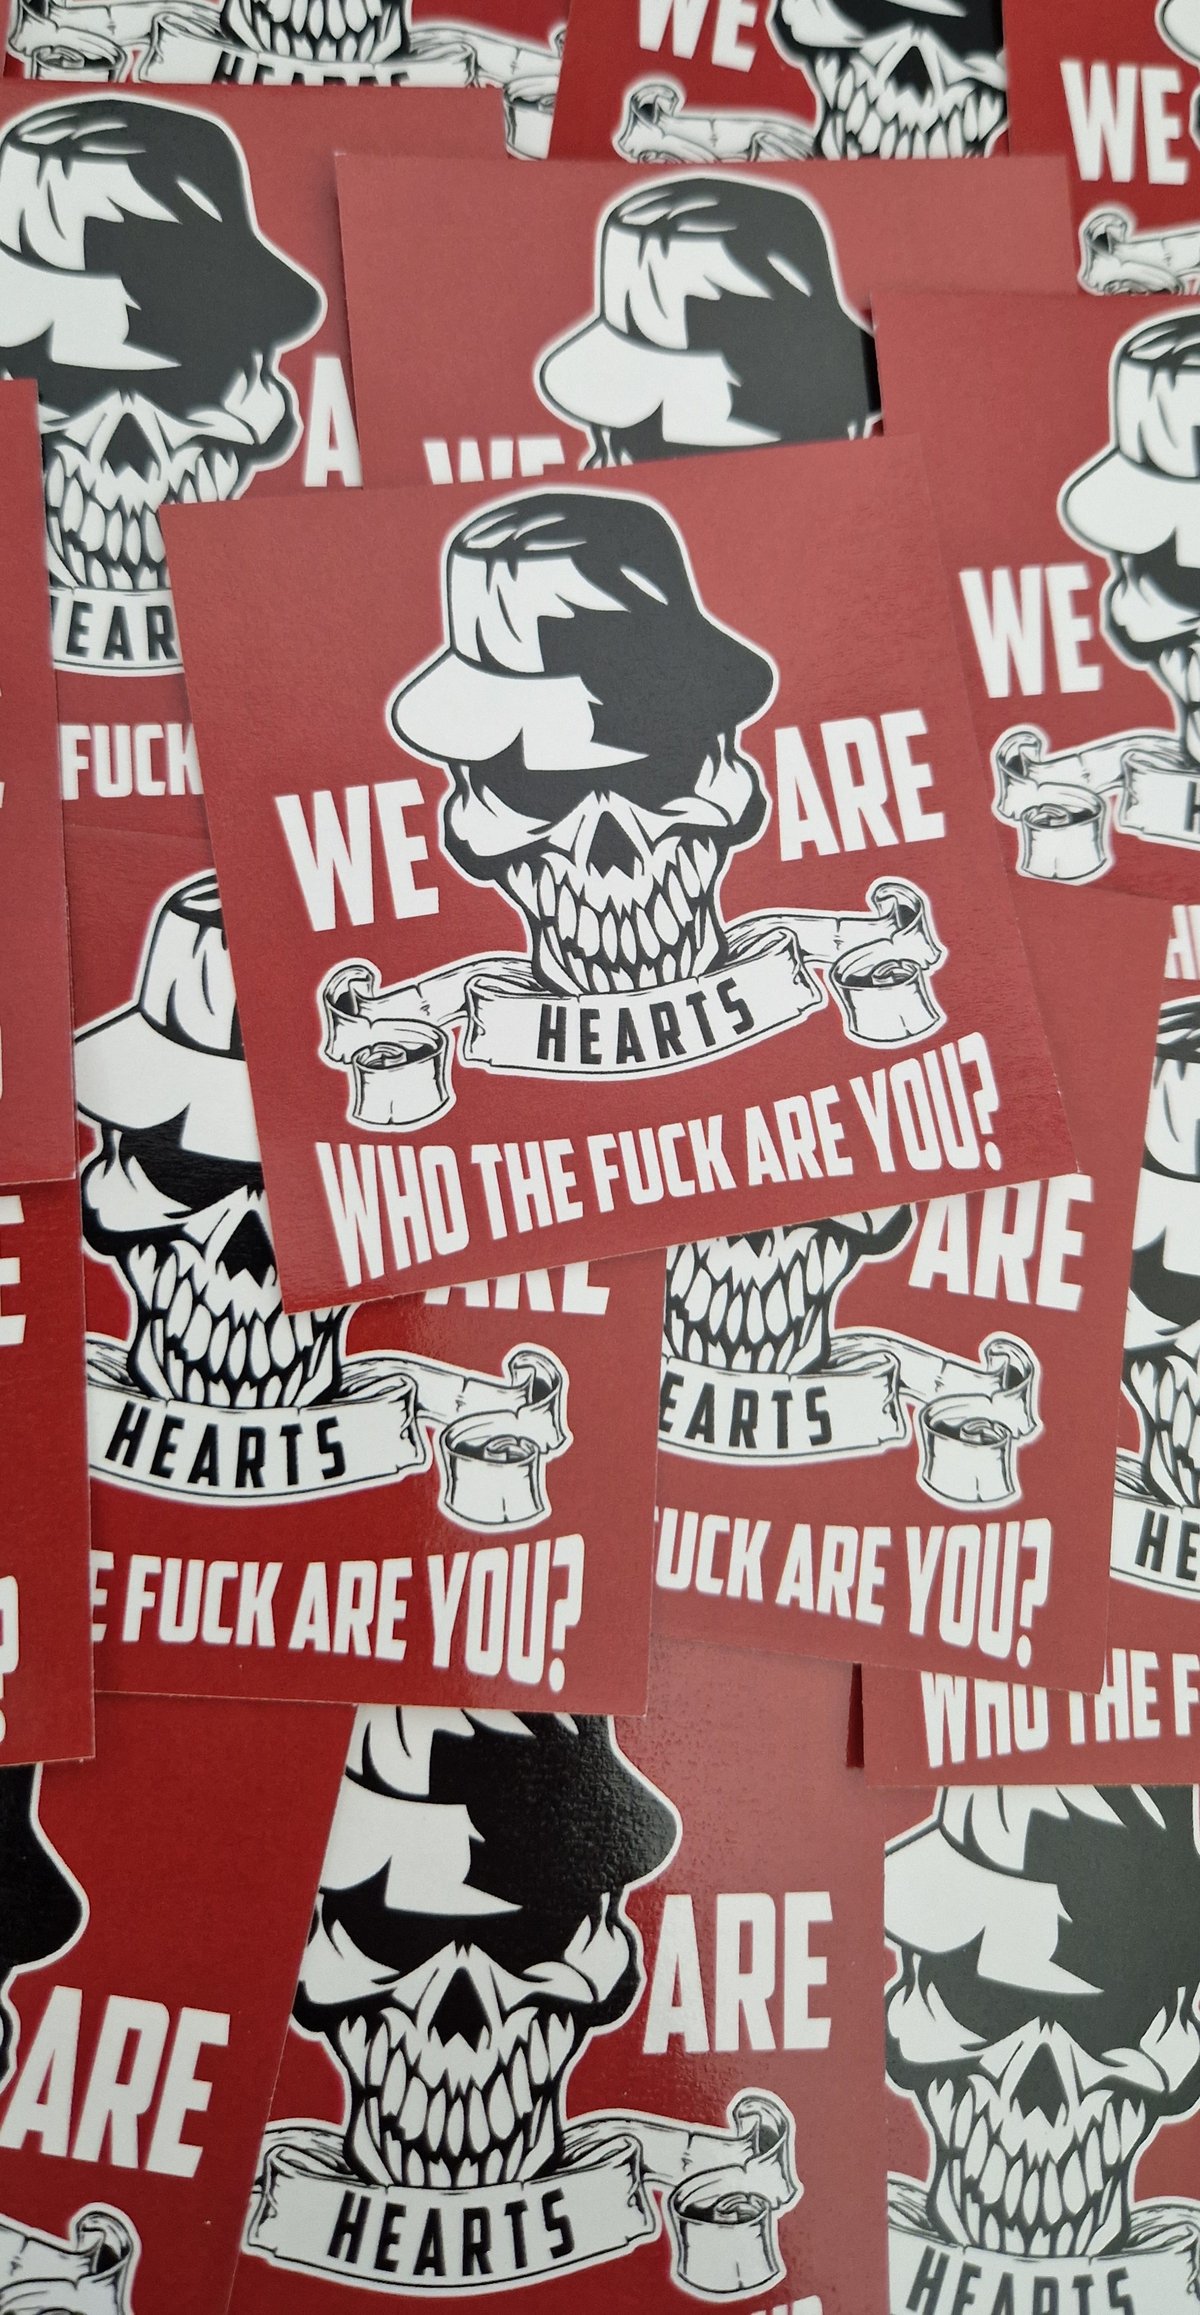 Pack of 25 7x7cm Heart Of Midlothian We Are Hearts Football/Ultras Stickers.